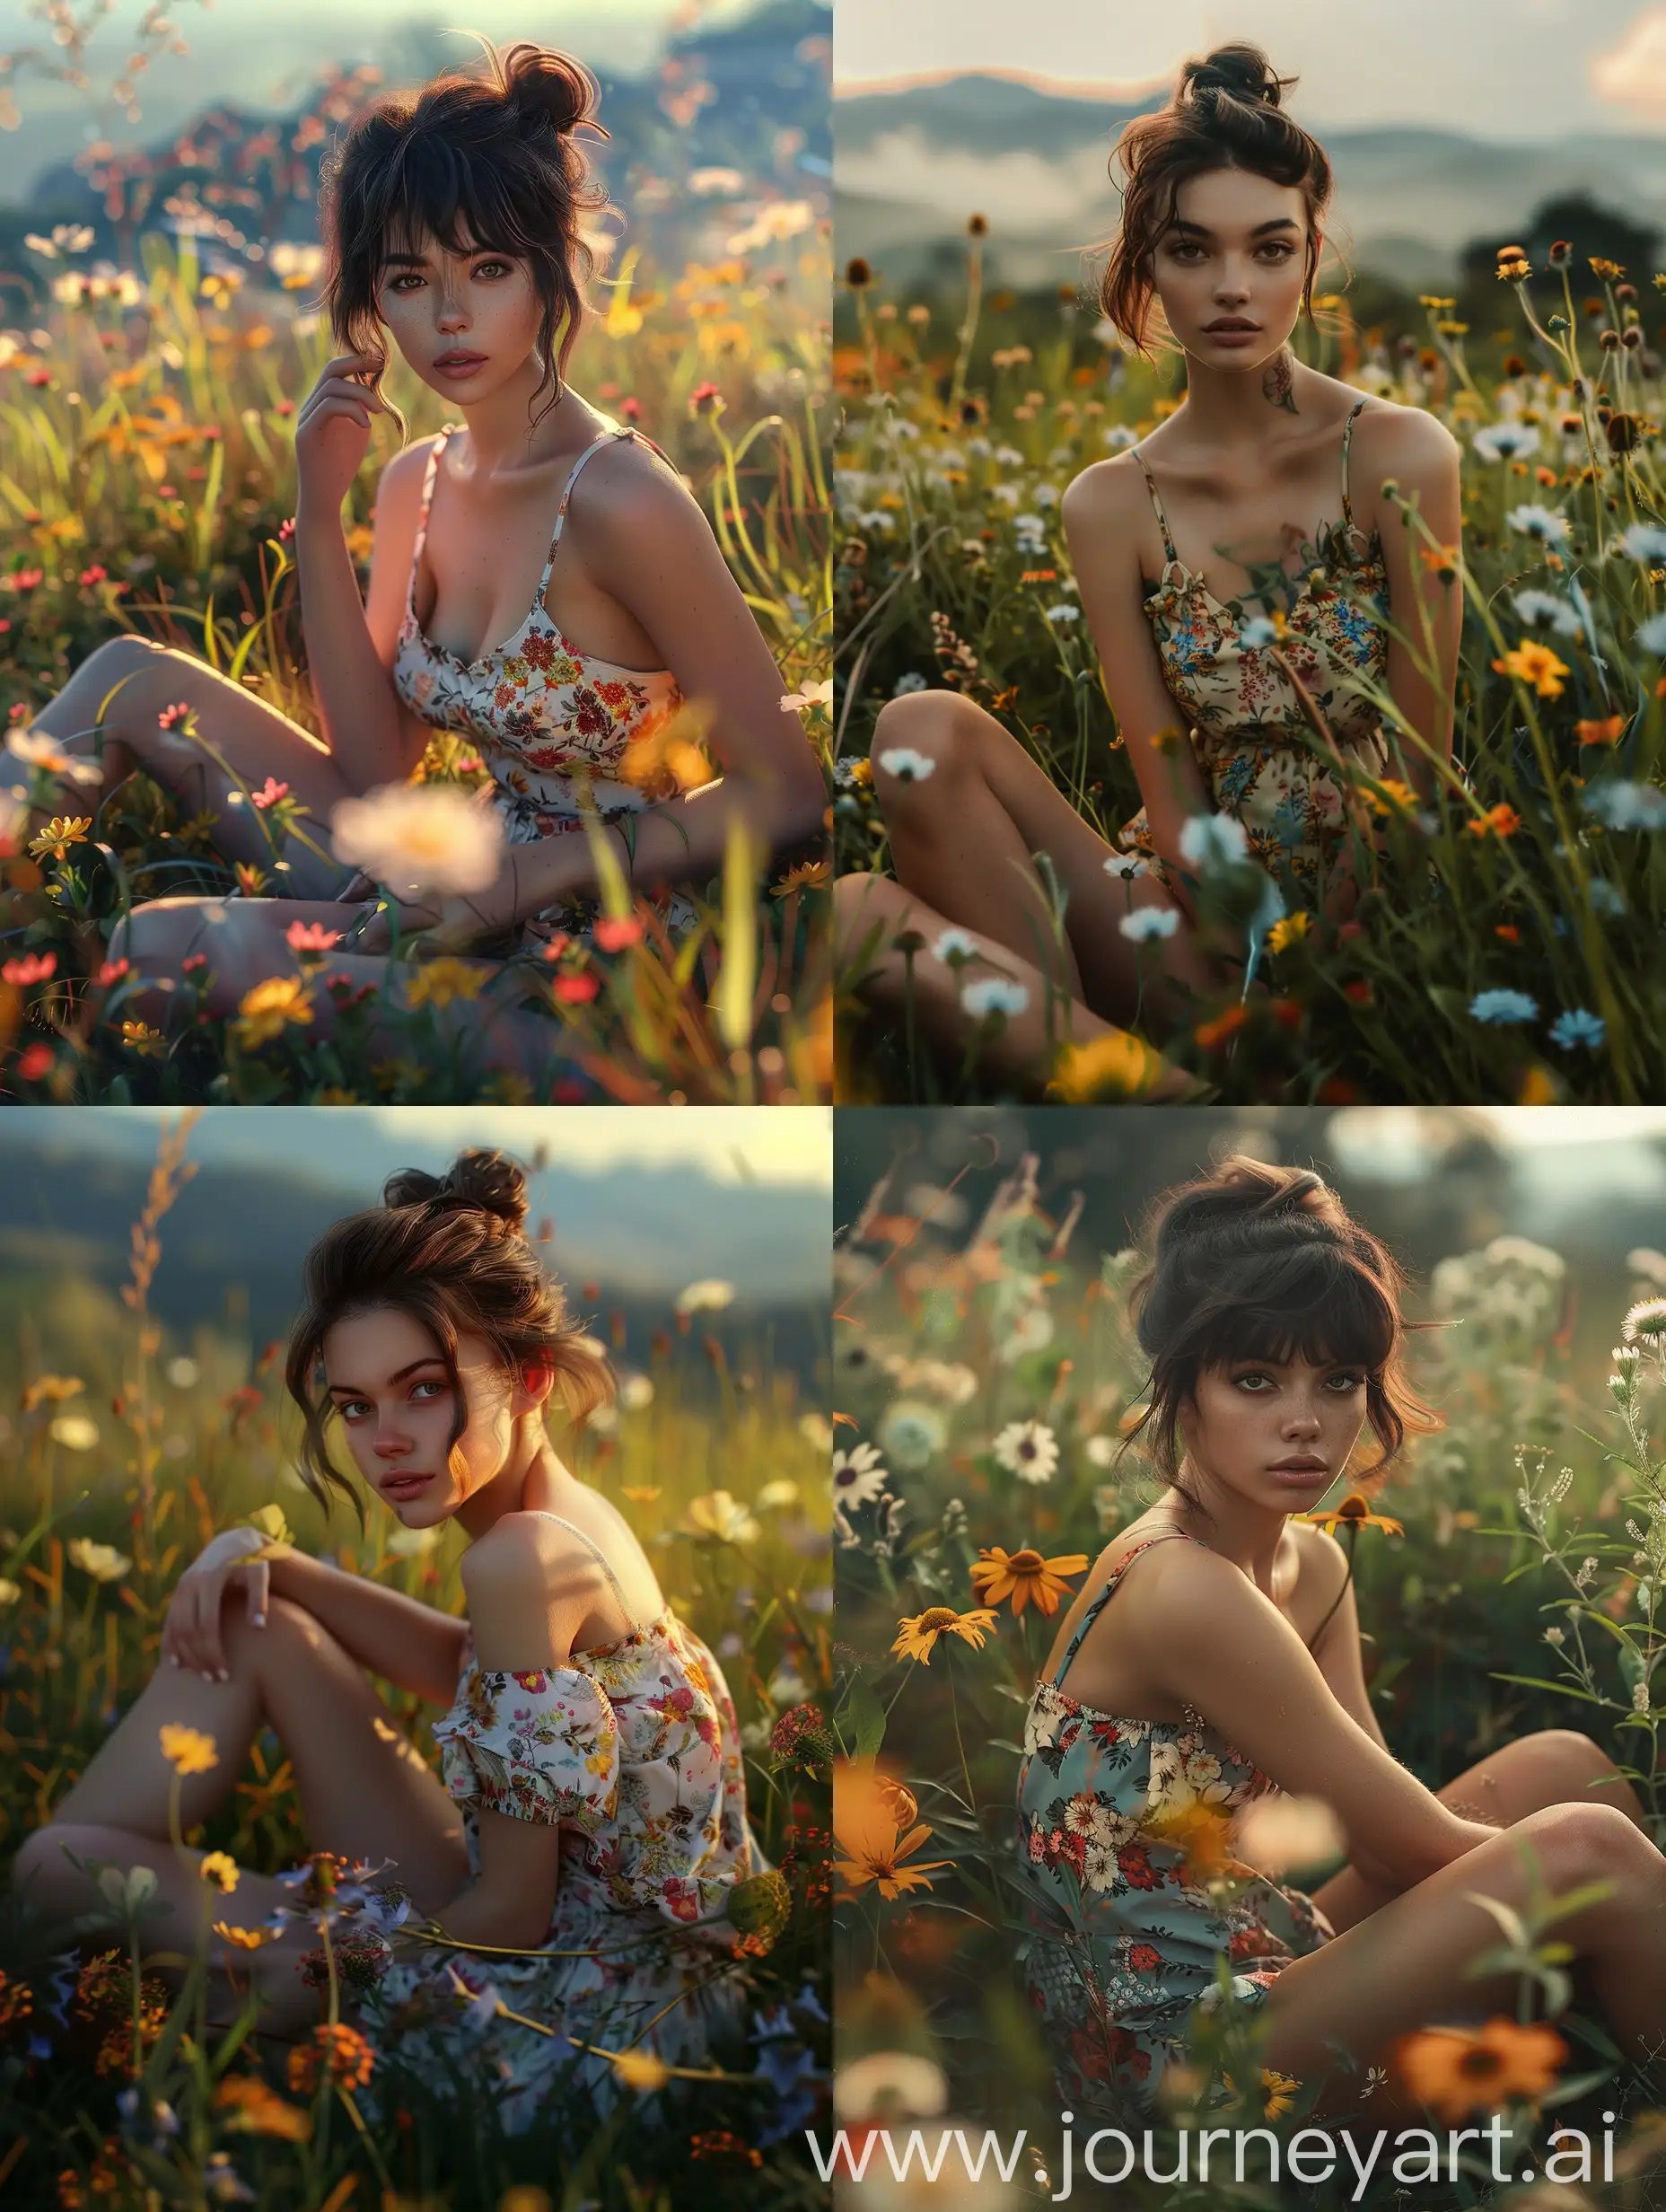 An ultra-detailed, ultra-realistic photo of a gorgeous and playful woman sitting on the grassland with her legs fixed naturally. She has short dark reddish-brown bun hair and is wearing a mini floral dress. The background is a serene, windy and enchanting landscape, characterized by an abundance of wildflowers in a meadow, illuminated by the soft, golden light of the rising sun. The flowers are a mix of warm yellows, oranges, and cool blues, creating a harmonious contrast that enhances the natural beauty of the scene. The background features distant mountains shrouded in a gentle mist, adding to the ethereal atmosphere. The foliage in the foreground, with its warm autumnal hues, frames the scene beautifully, giving it a dreamlike quality. The overall mood is peaceful and idyllic, evoking a sense of tranquility and connection with nature.